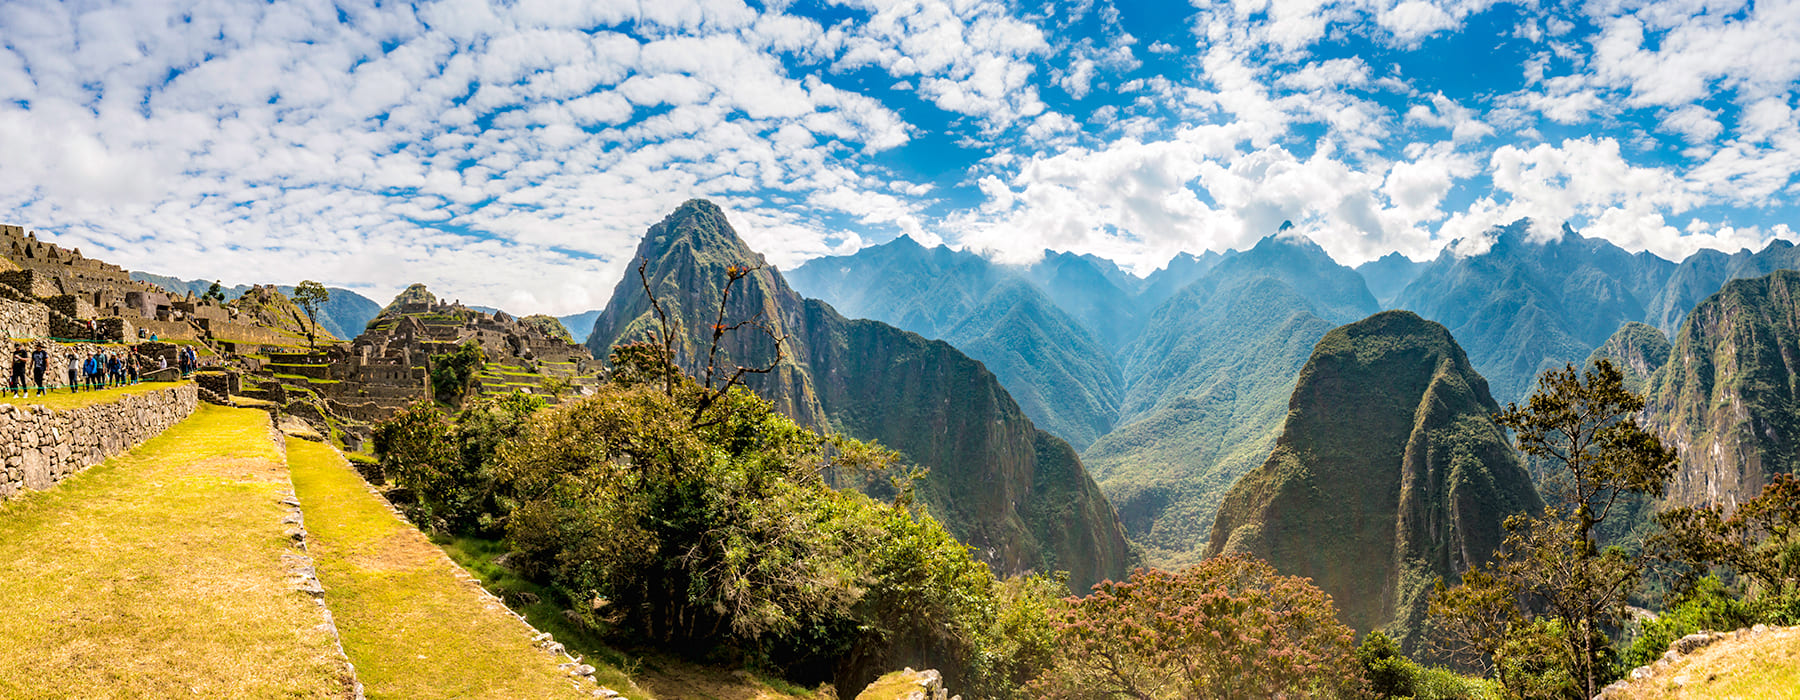 HOW LONG IS THE INCA TRAIL TO MACHU PICCHU?